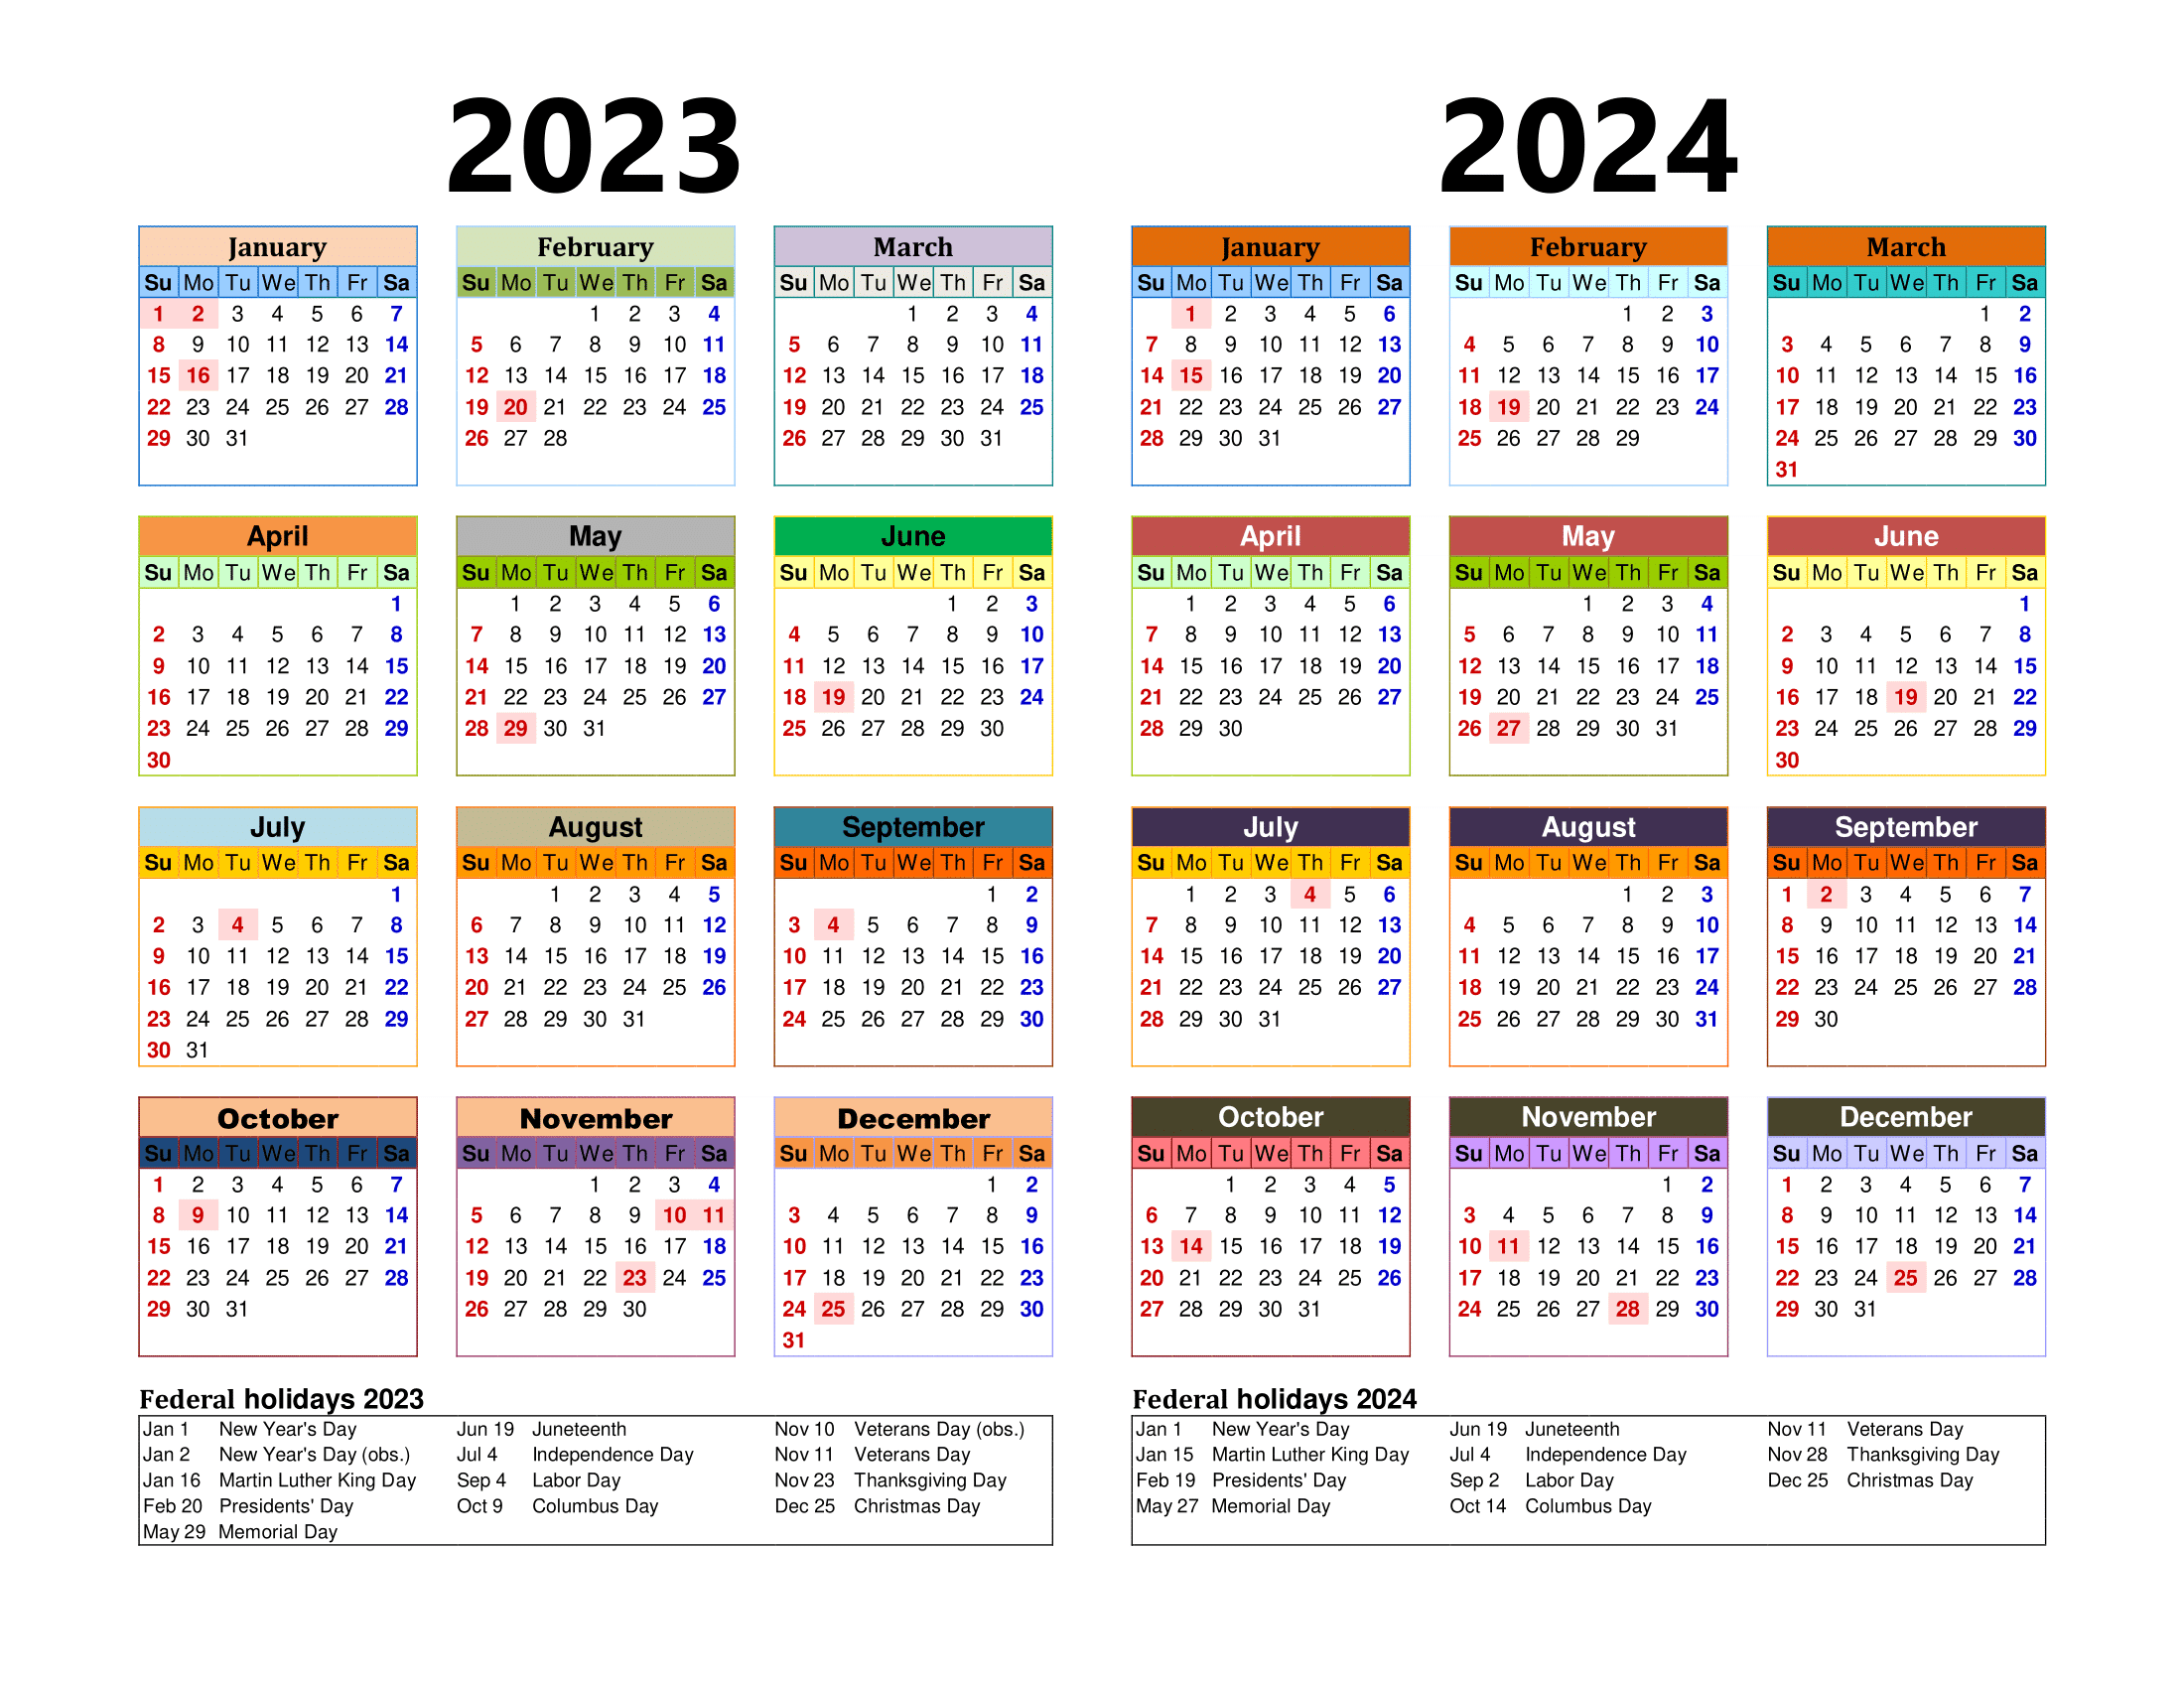 Free Printable Two Year Calendar Templates For 2023 And 2024 In Pdf for 2023 And 2024 Monthly Calendar Printable